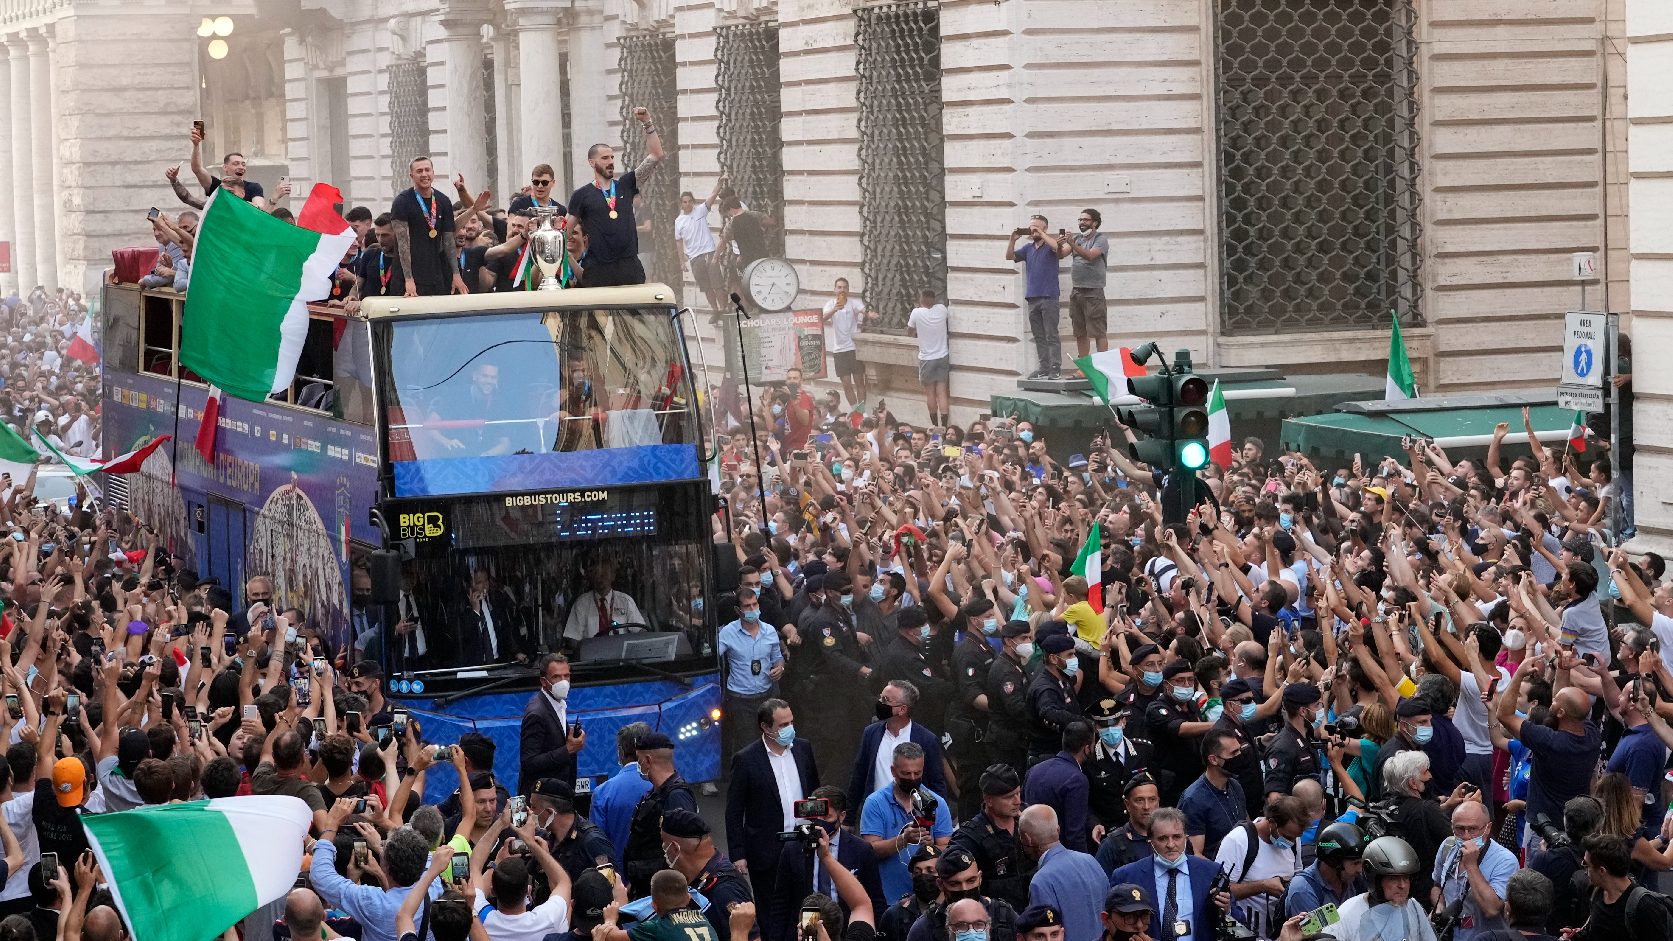 They fenced the bus too!  Hundreds gathered to celebrate the Italian national team